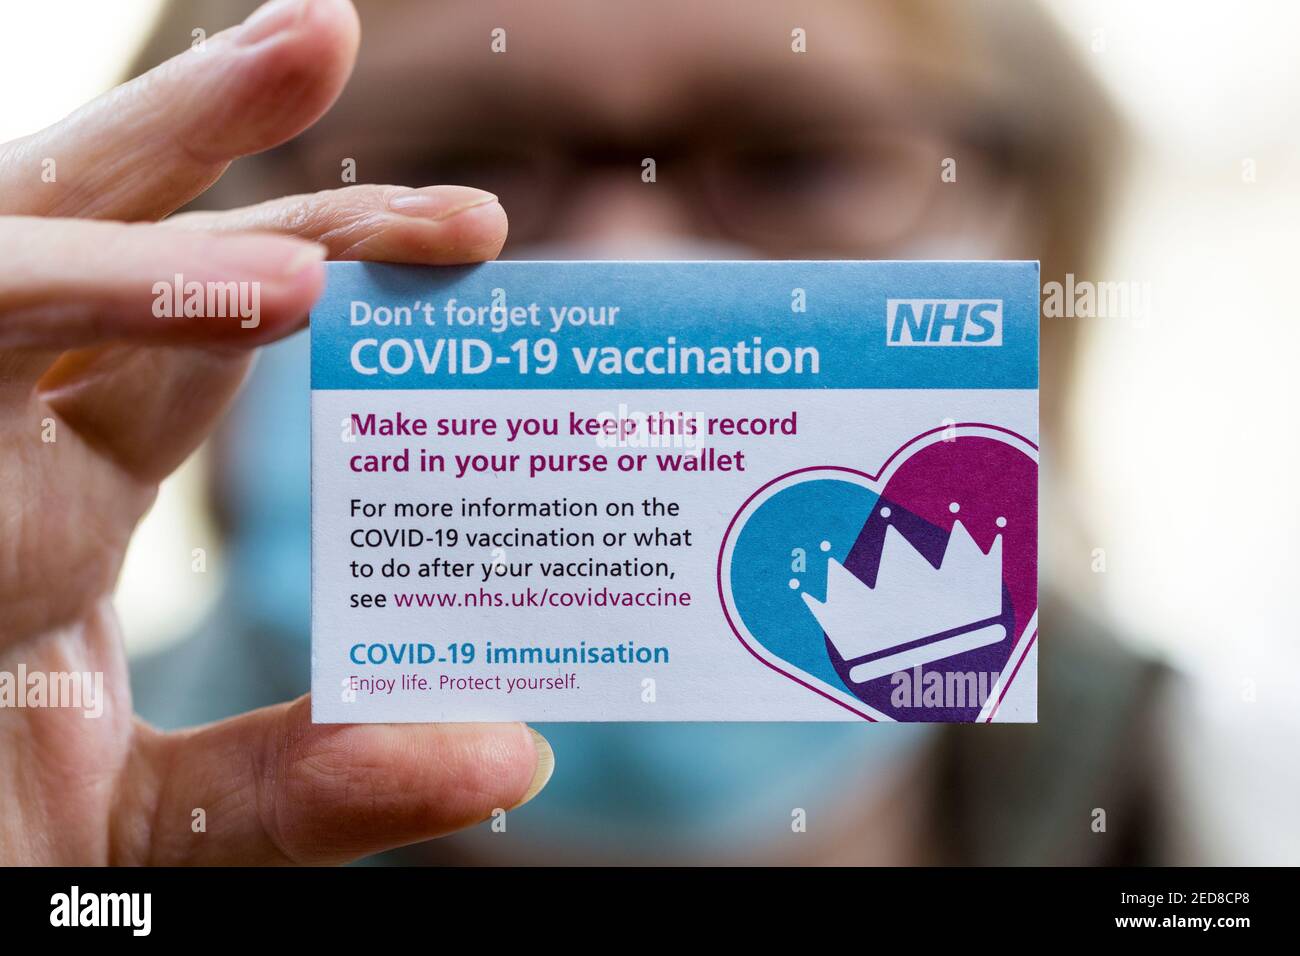 NHS COVID-19 vaccination record card given to patients after they have been vaccinated. Stock Photo